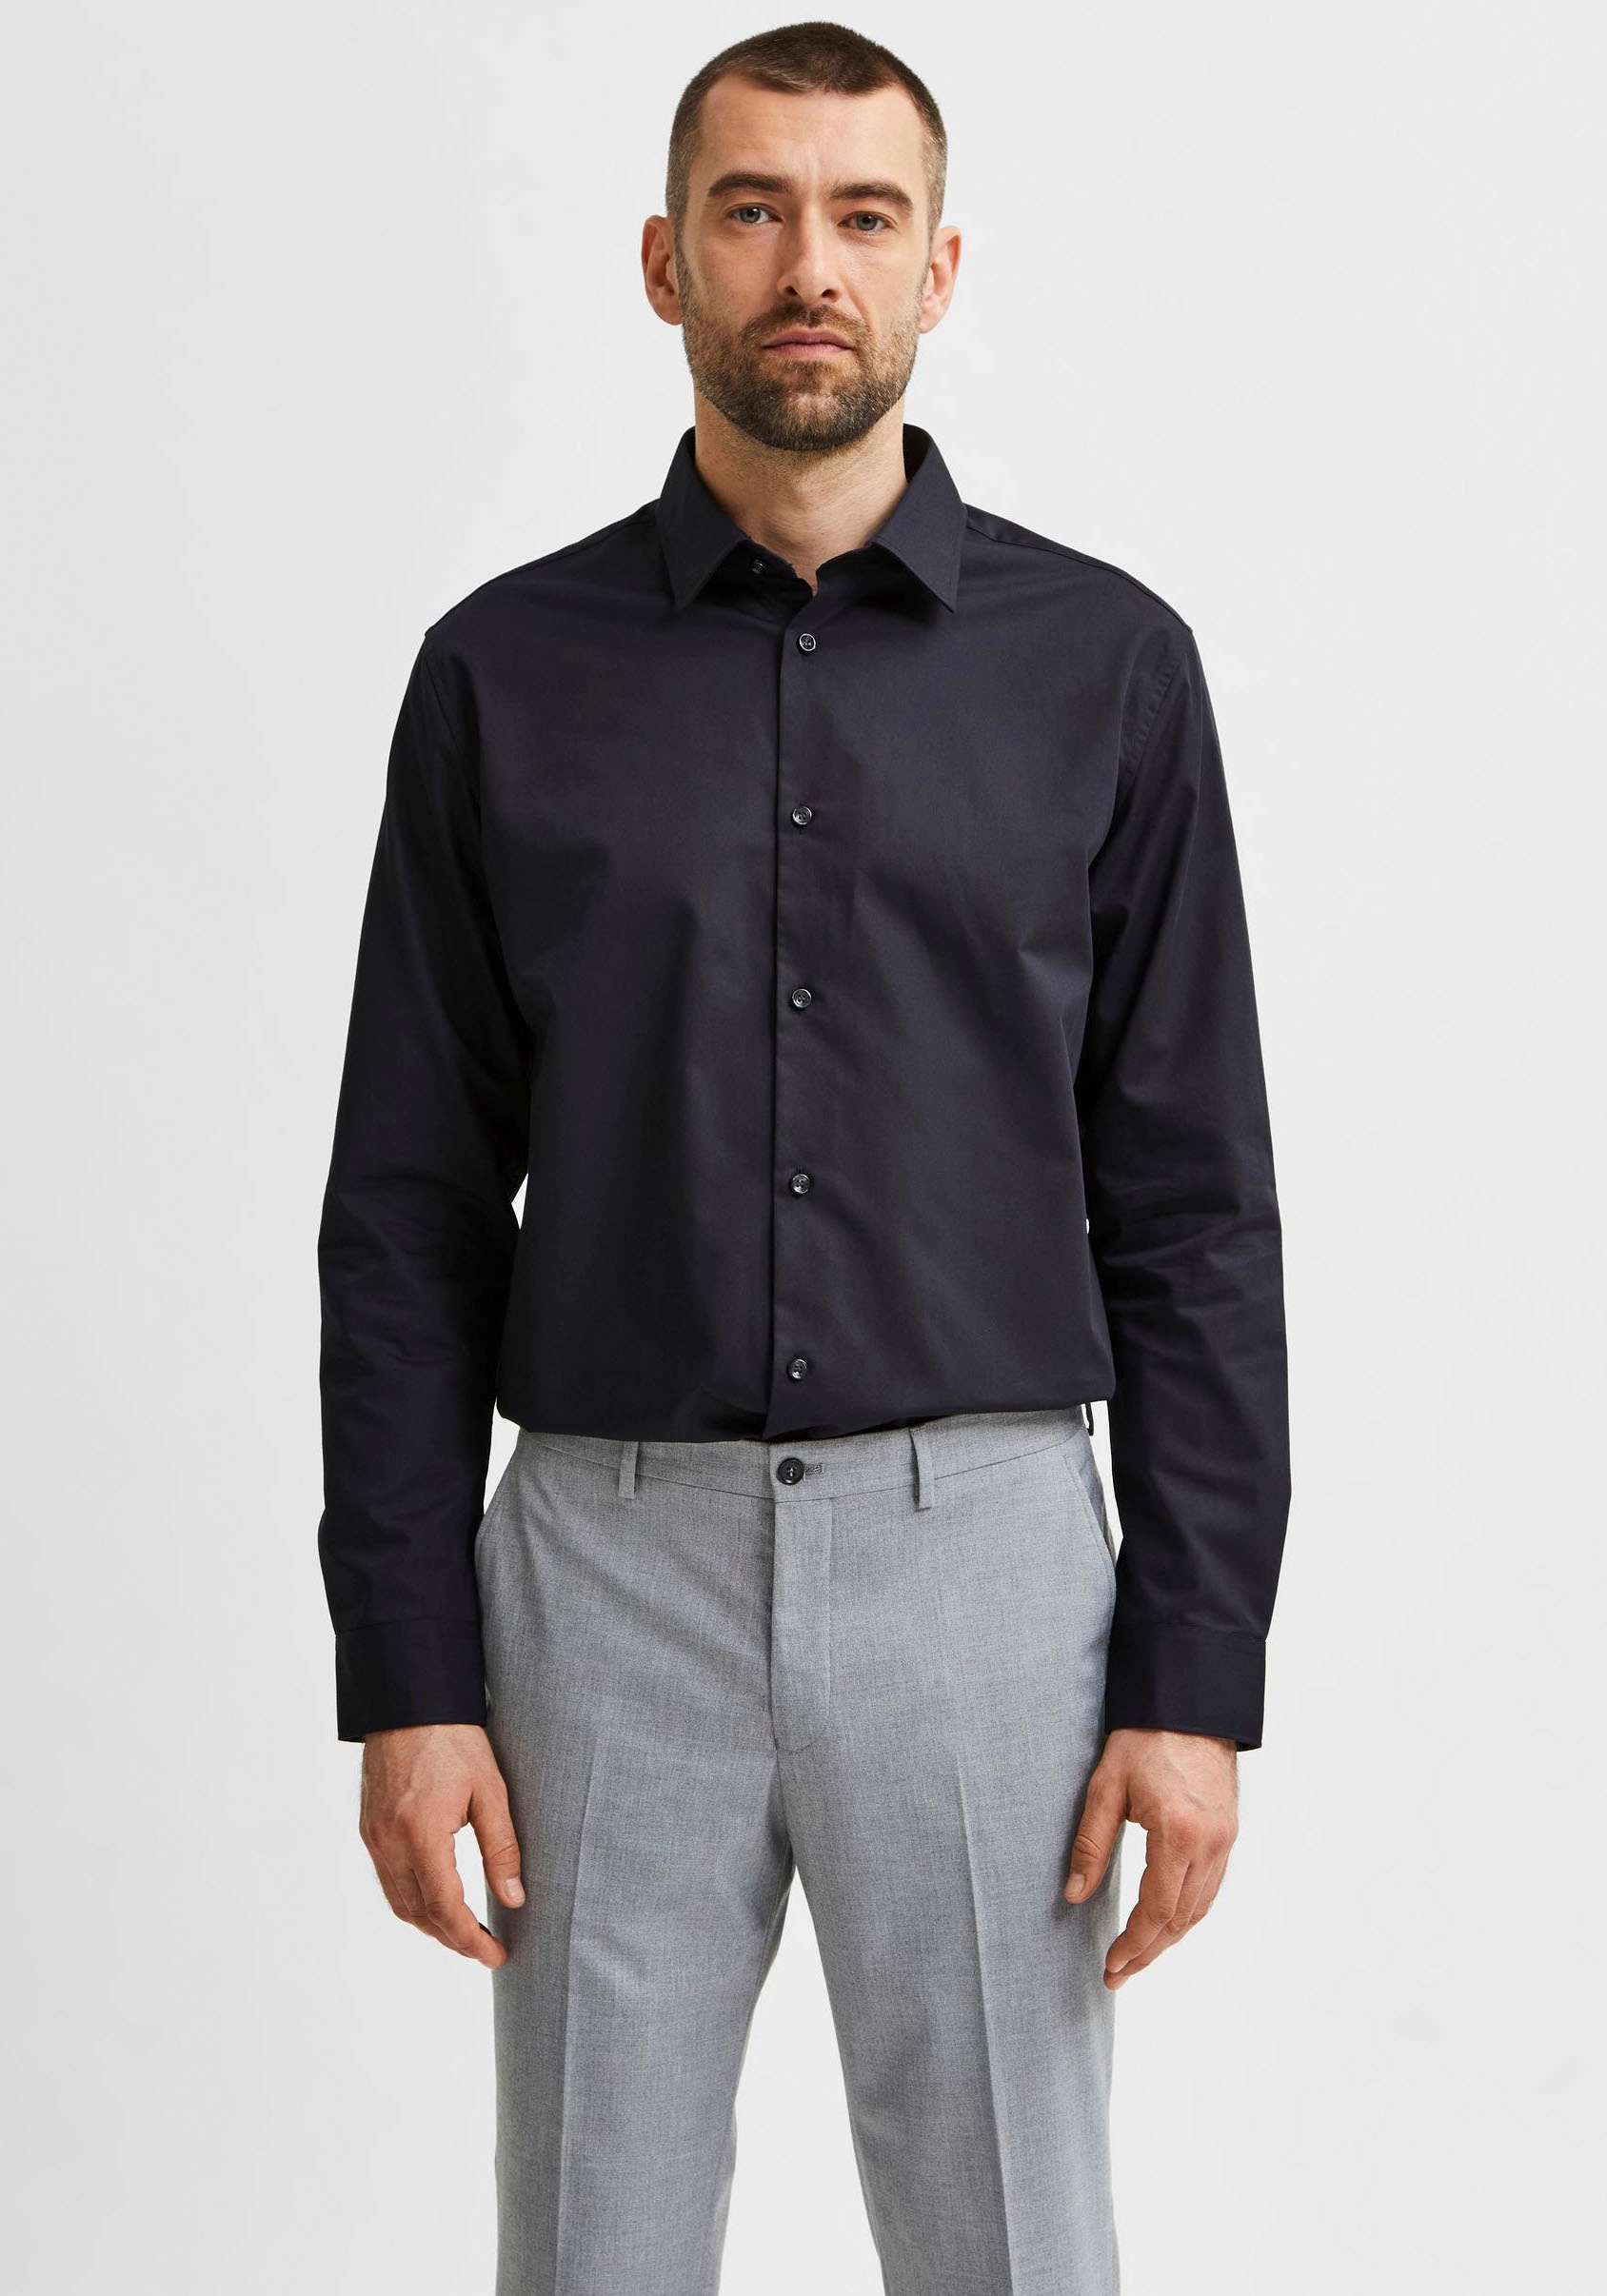 HOMME SELECTED OTTO »SLHSLIMETHAN online bei kaufen SHIRT« Businesshemd